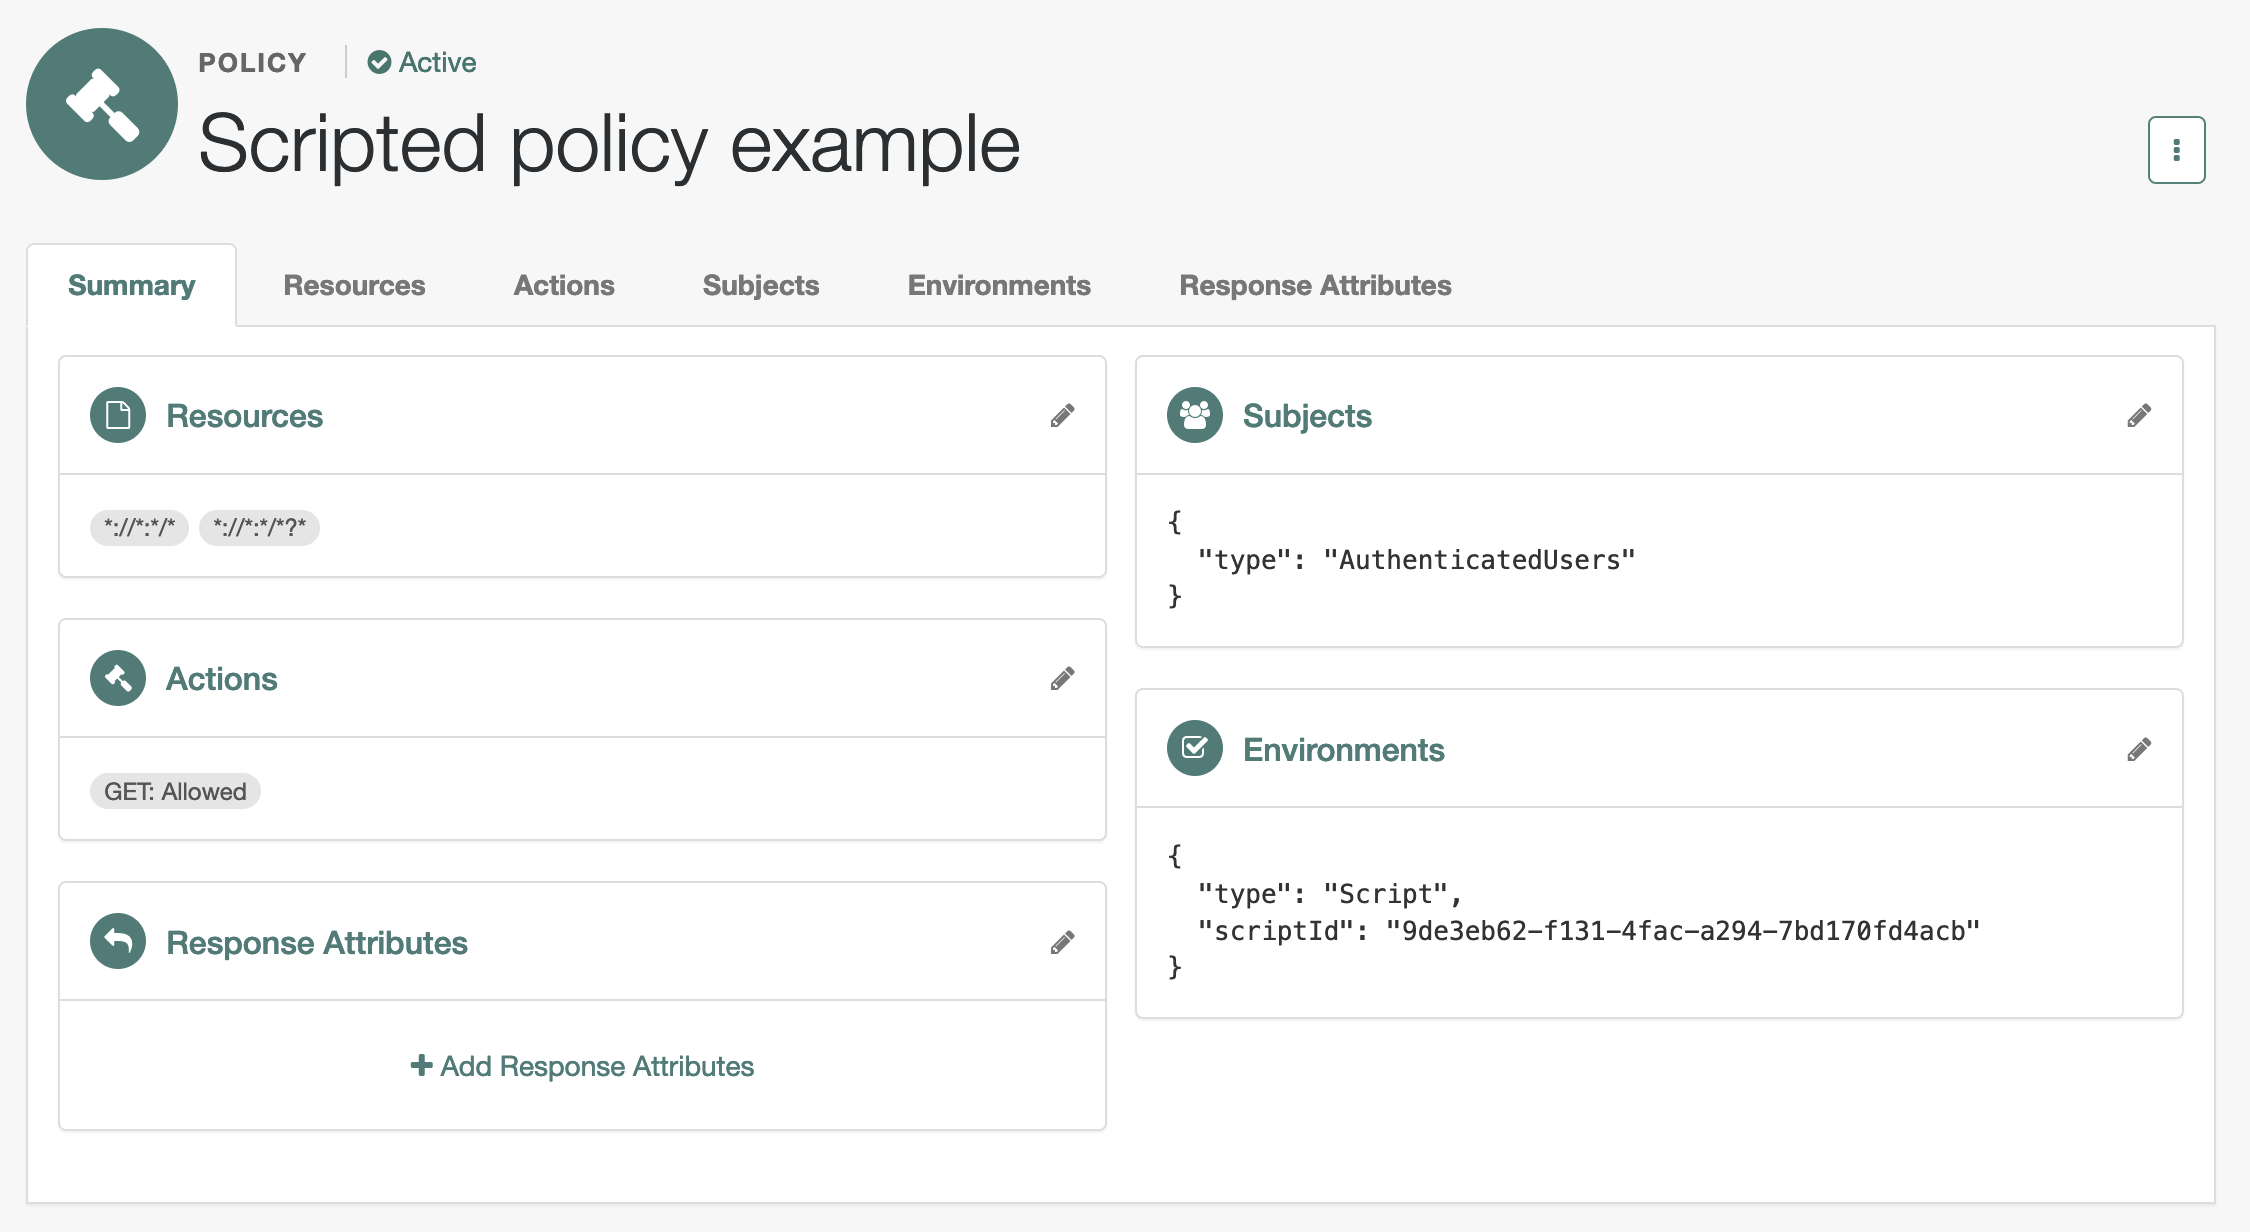 Policy settings for the Scripted policy example